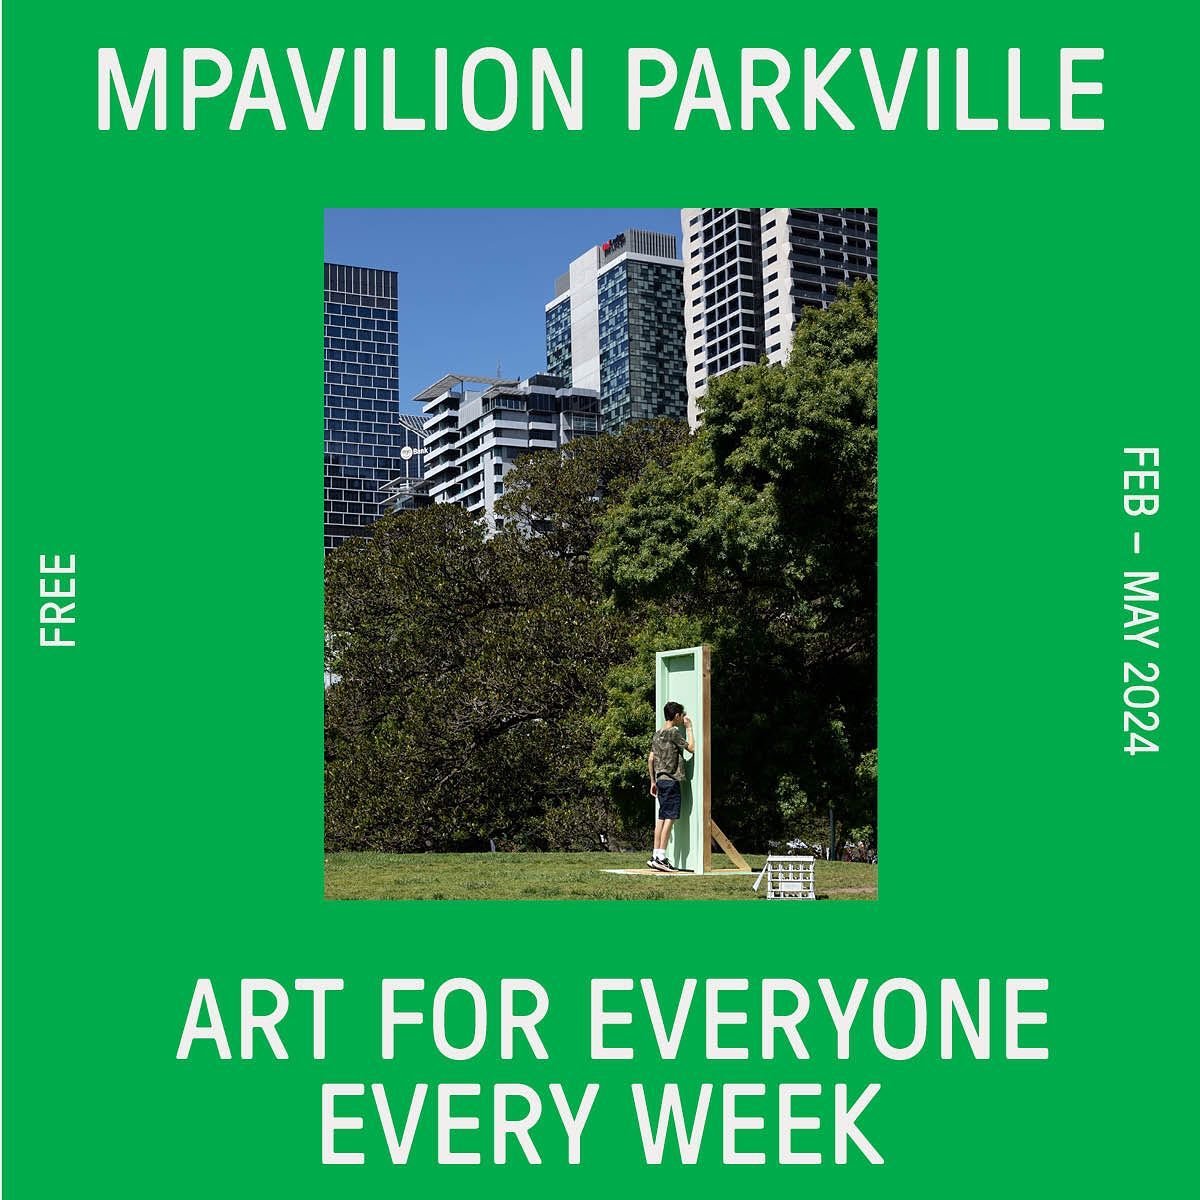 Duty of Care will be open for business at MPavilion Parkville next week 27th to 29th February, 11am - 3pm daily. Come say hello!

Many other great artists over 13 weeks. Installations, performances, events and demonstrations. All FREE